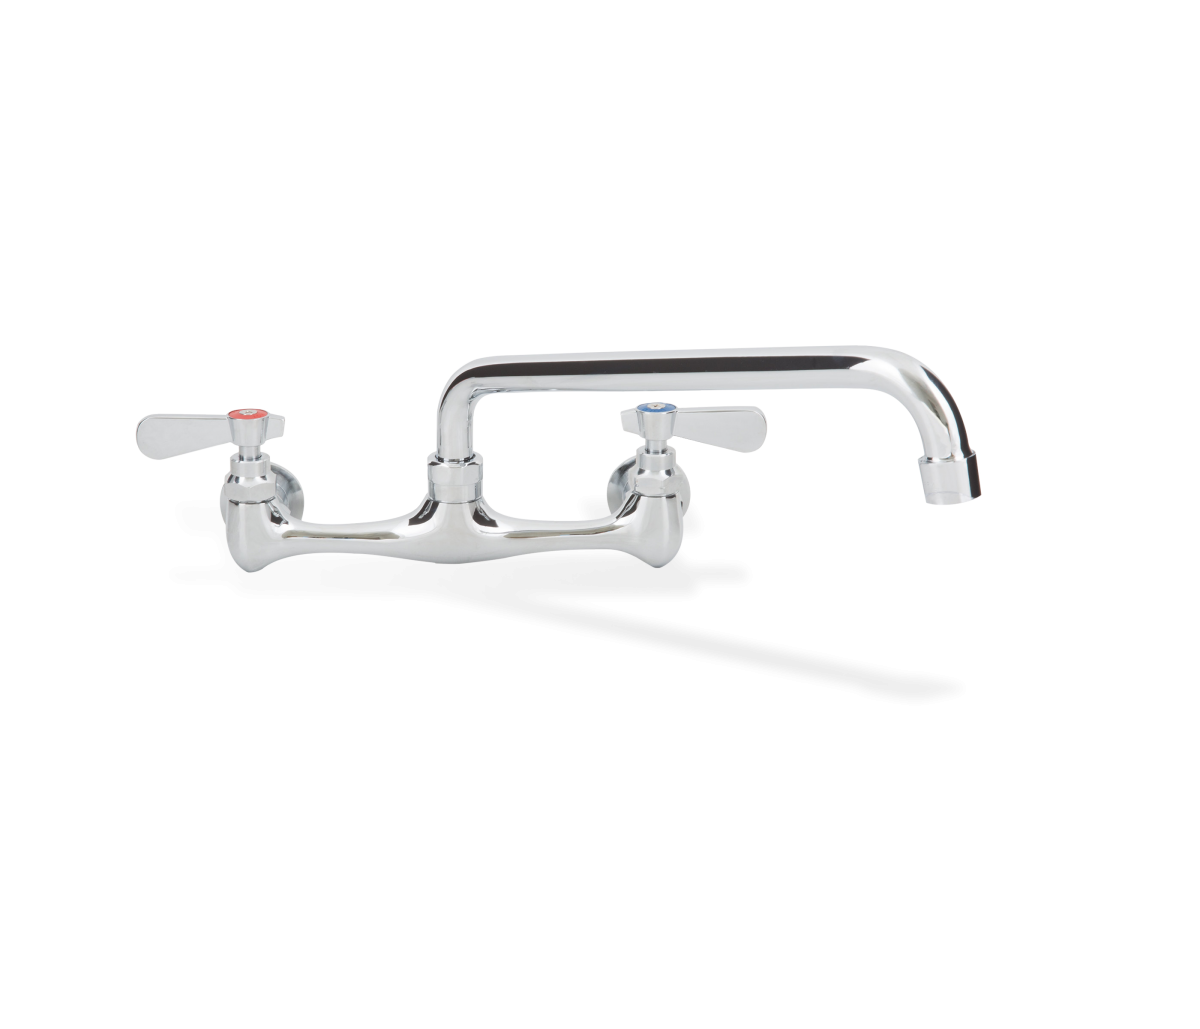 8 Inch Wall Mount Faucet - SWFW-8-8LL